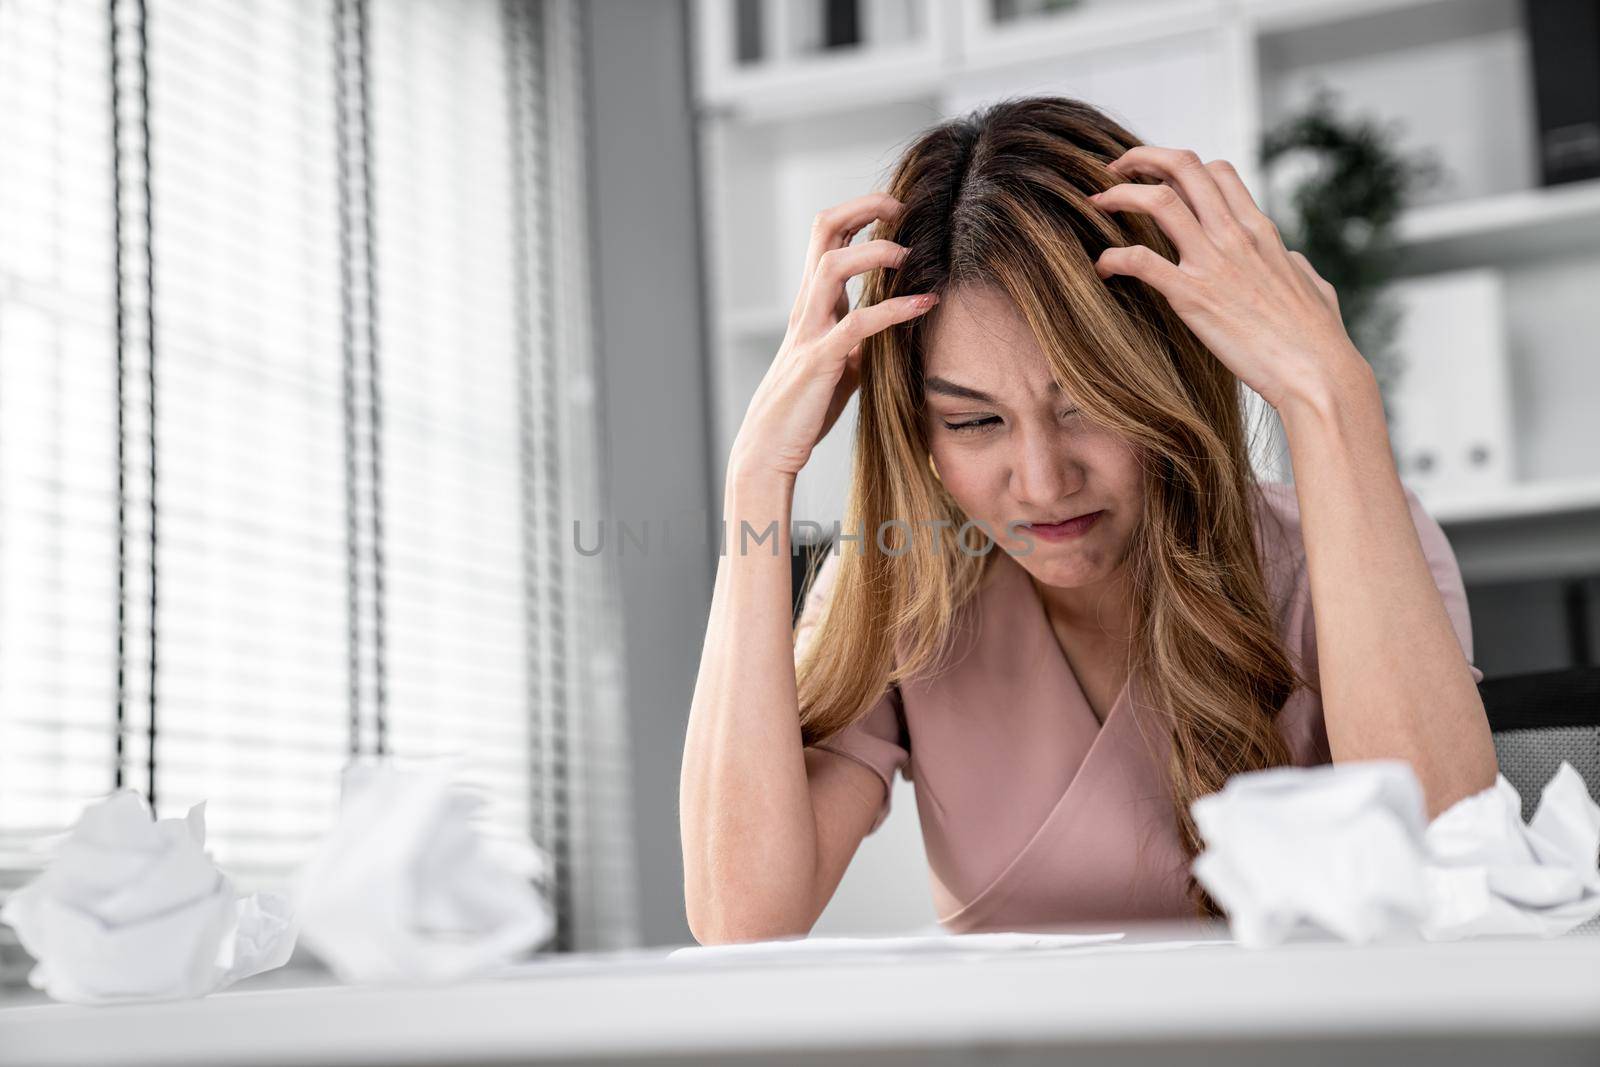 A competent female employee who has become completely exhausted as a result of overburdened work. Concept of unhealthy life as an office worker, office syndrome.